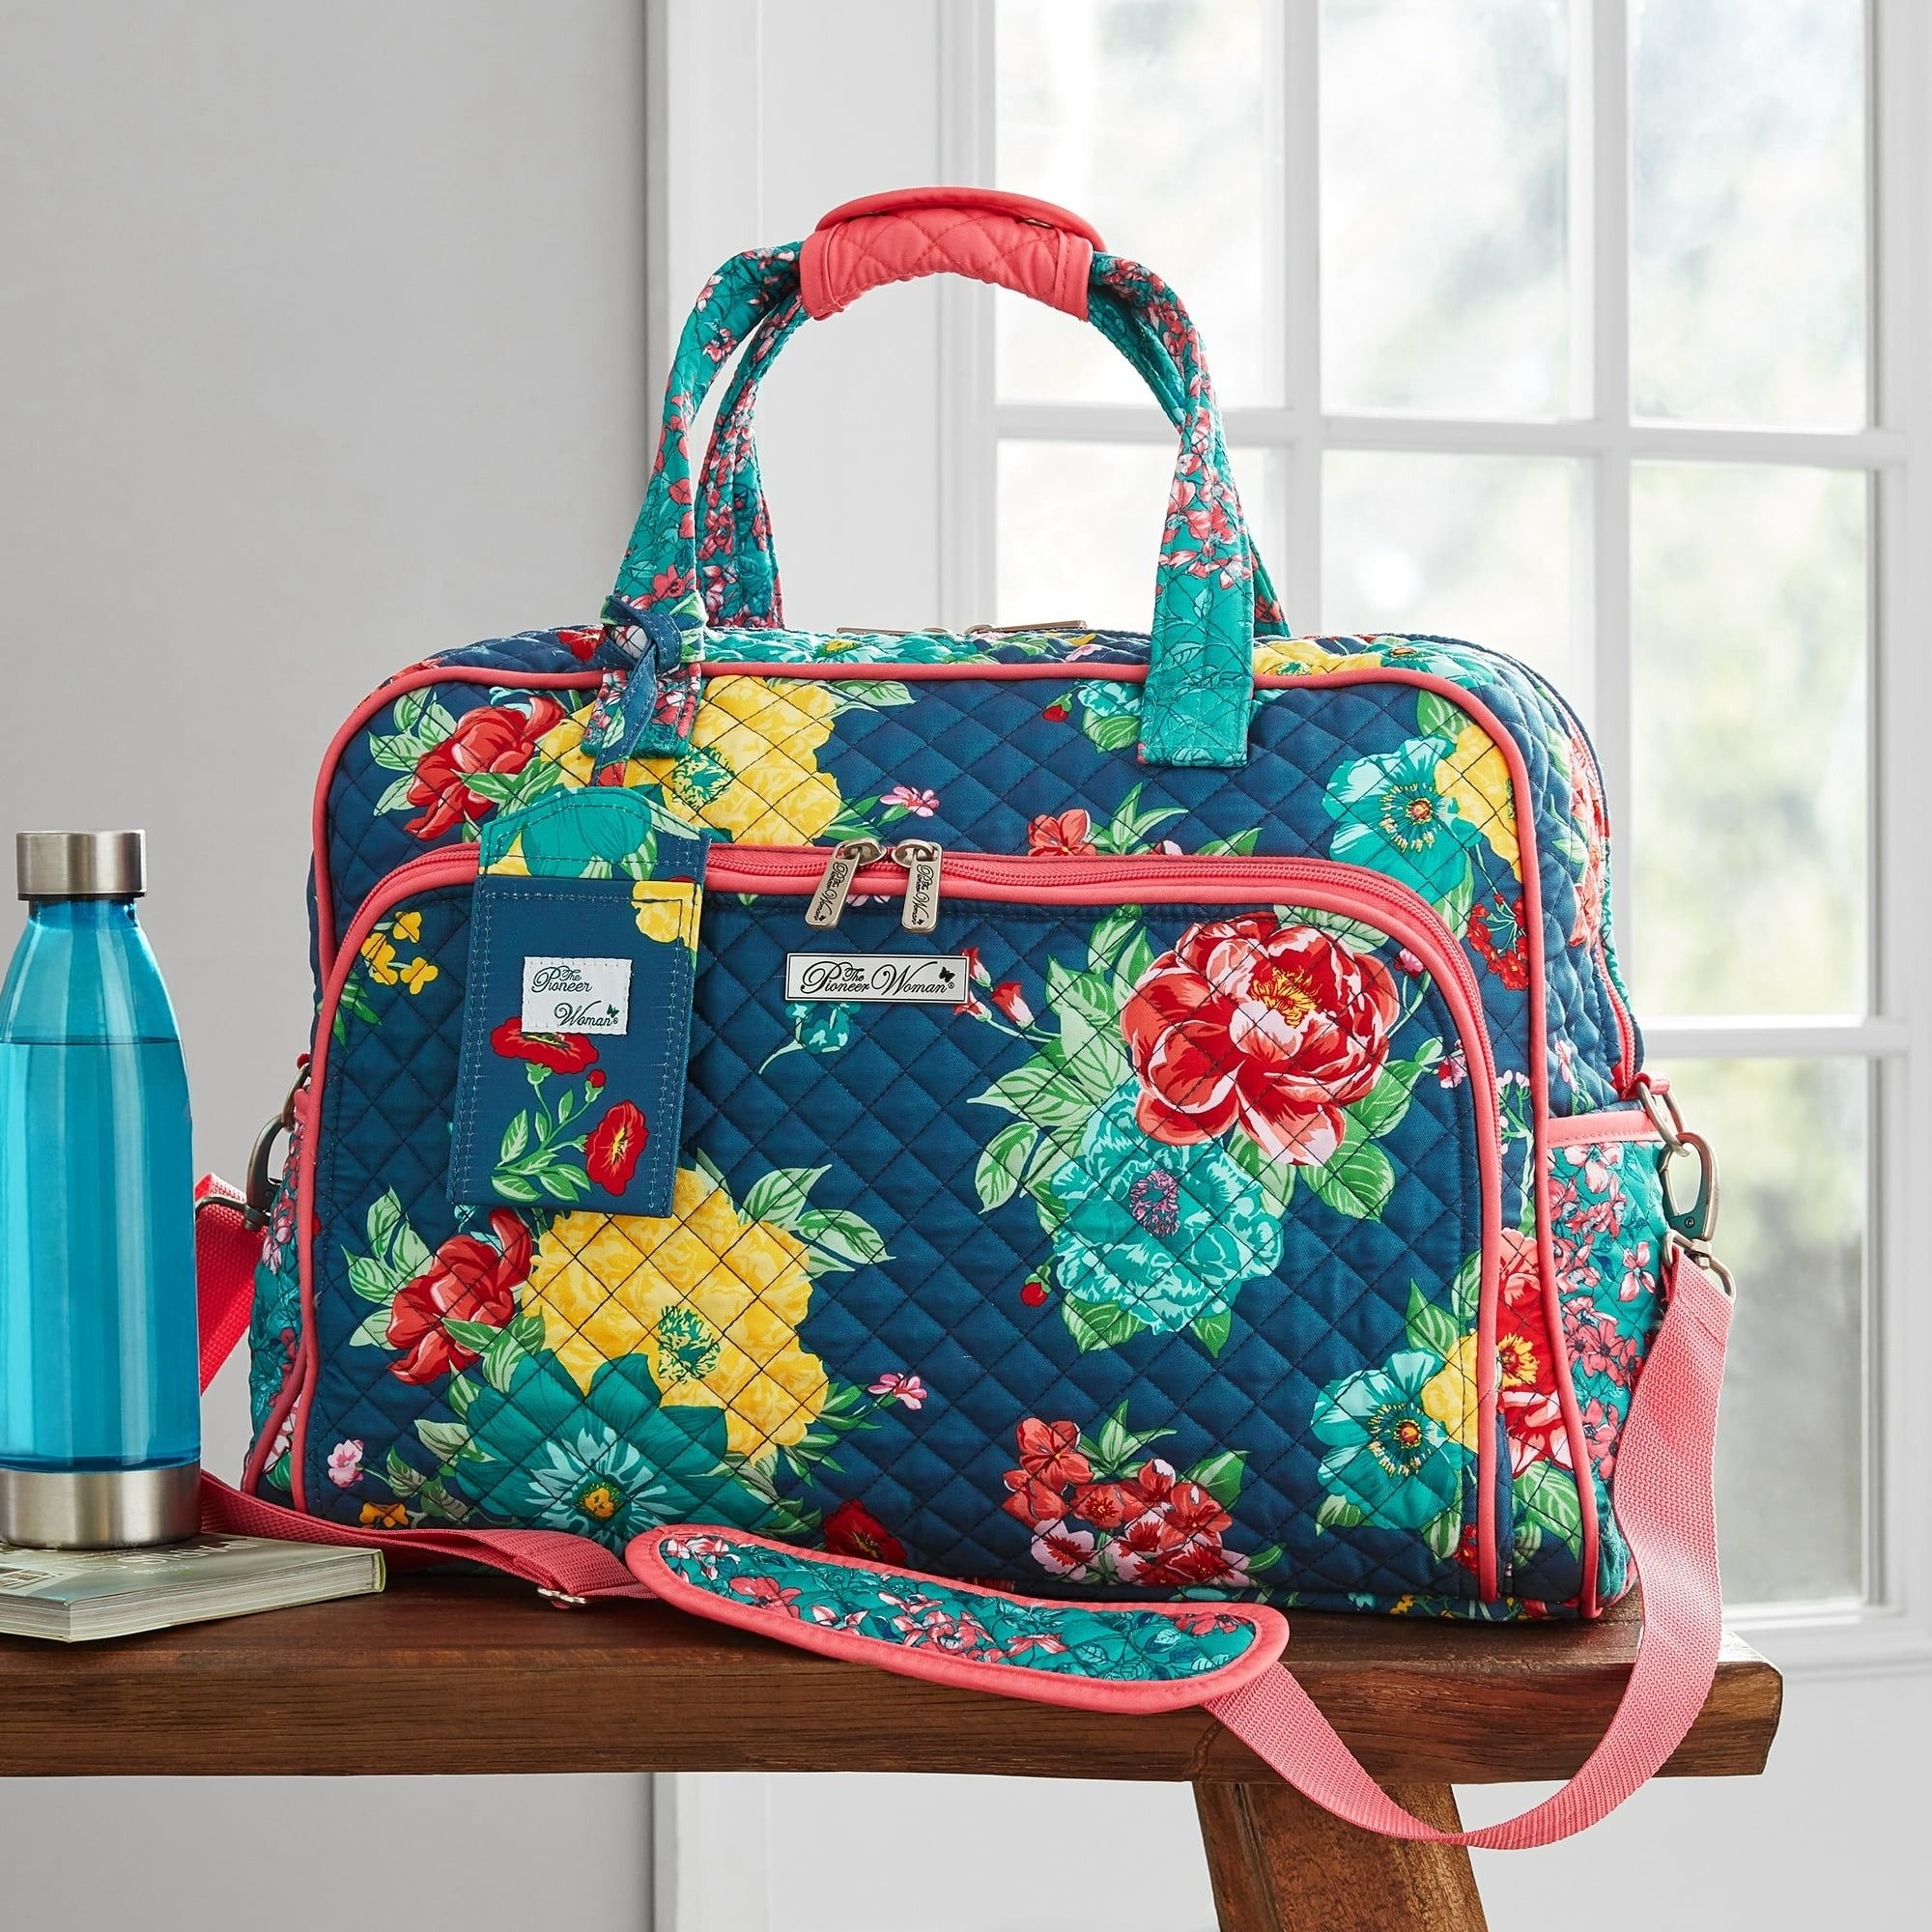 Shop The Pioneer Woman Quilted Fabric Weekender Bag at Walmart